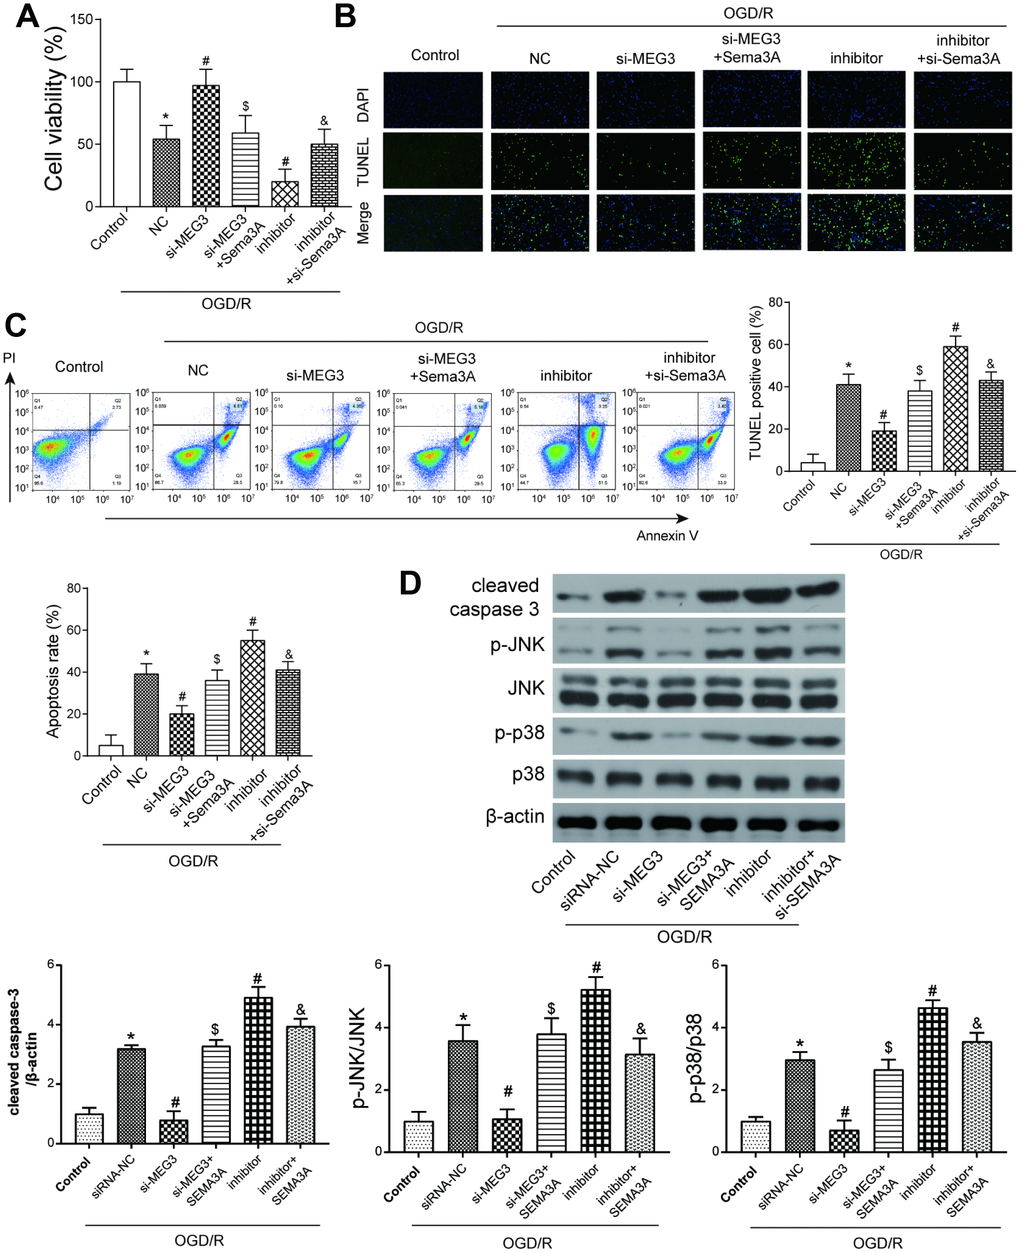 The MEG3/miR-424-5p/Sema3A axis affected cell viability and apoptosis in OGD cells via the MAPK pathway. (A) OGD/R cells have lower cell viability compared with control group. Among OGD/R cells, MEG3 downregulation led to higher cell viability, which could be offset by a simultaneous overexpression of Sema3A; miR-424-5p downregulation by its inhibitor led to a lower cell viability compared among OGD/R cells, which could be neutralized by a simultaneous downregulation of Sema3A. *PPPPB, C) OGD/R cells tend to have fairly high apoptosis rate compared to control group. Among OGD/R cells, MEG3 downregulation led to lower cell apoptosis level, which could be neutralized by a simultaneous overexpression of Sema3A; miR-424-5p downregulation by its inhibitor mediated more cell apoptosis, which could be neutralized by a simultaneous downregulation of Sema3A. *PPPPD) OGD/R cells tend to have higher cleaved caspase-3, p-JNK and p-p38 expression in comparison with control. Among OGD/R cells, the low expression of MEG3 led to a rise in expression of cleaved caspase-3, p-JNK and p-p38, miR-424-5p inhibitor led to drop of expression of cleaved caspase-3, p-JNK and p-p38. Sema3A overexpression could reverse the rise of si-MEG3, while si-Sema3A could reverse the drop of miR-424-5p inhibitor. *PPPP